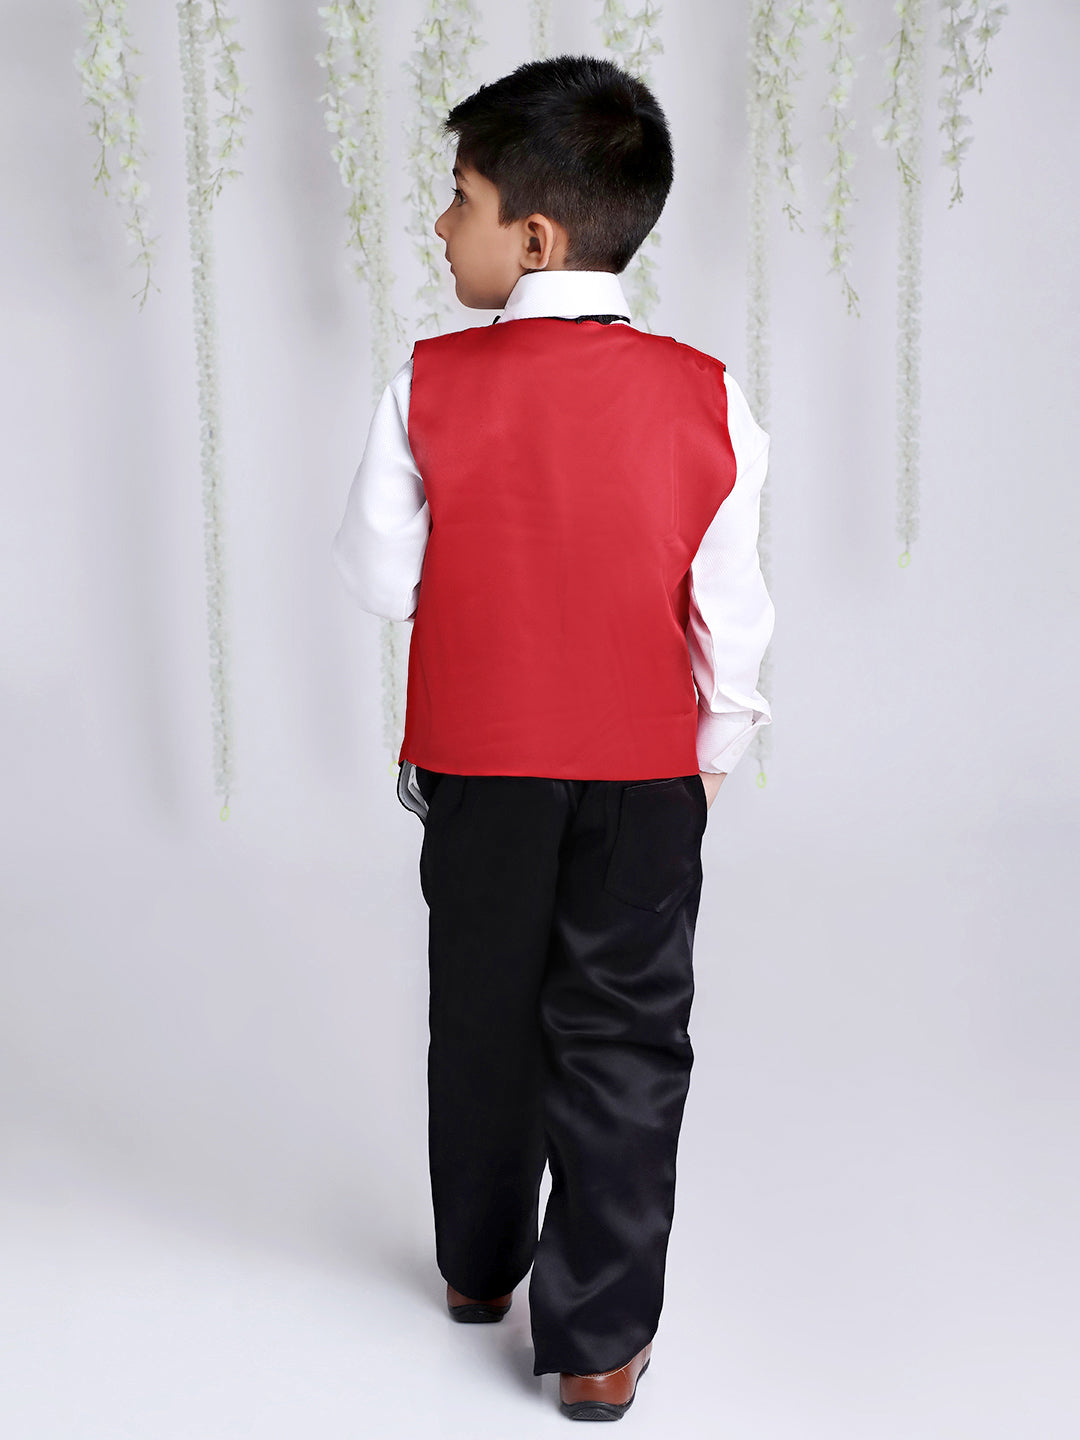 Boy's Party Wear suit with bow-tie - KID1 Boys